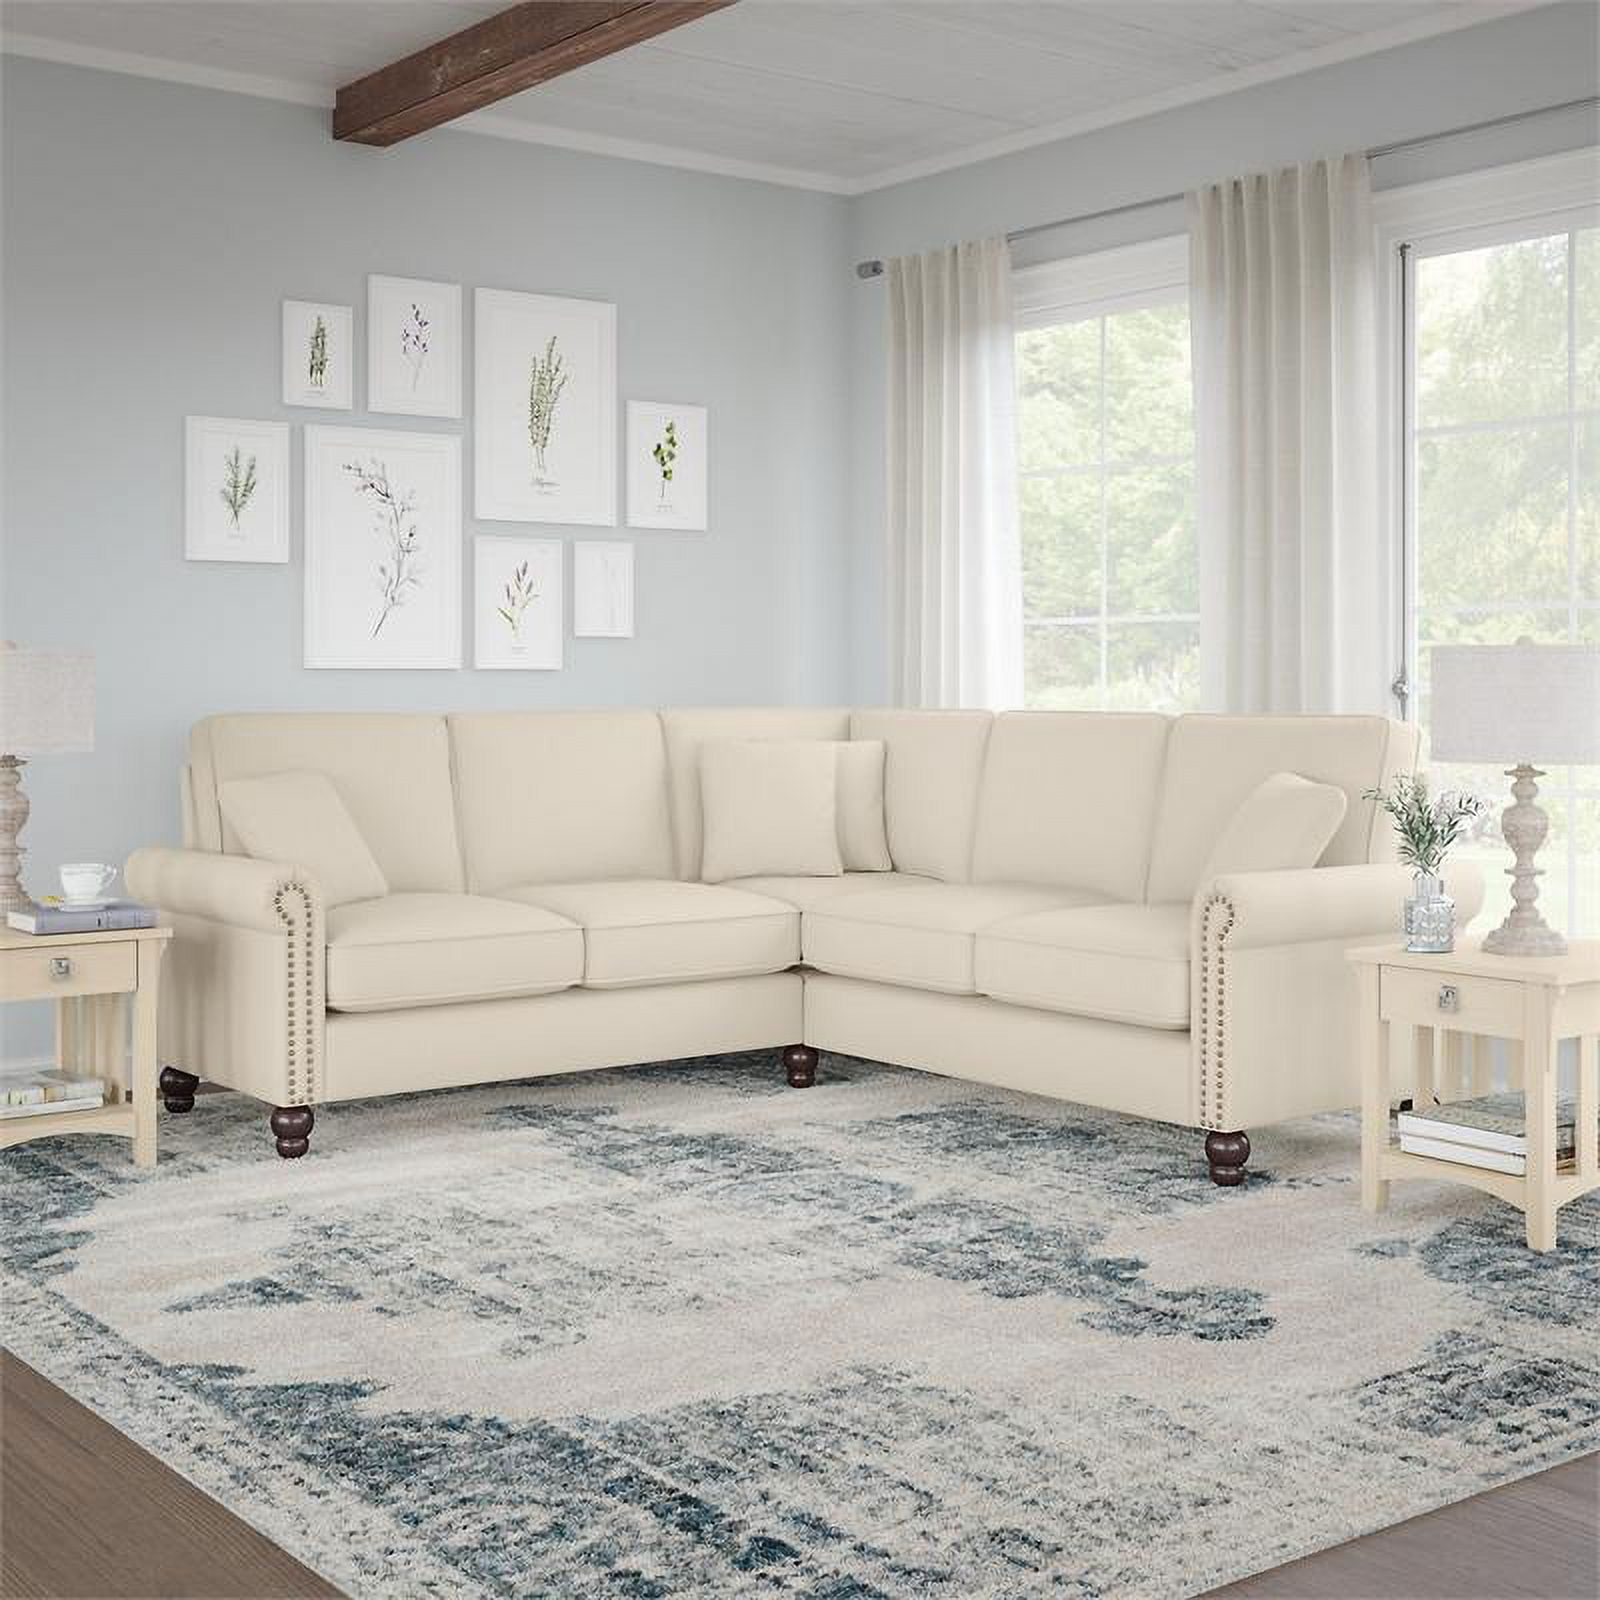 Hooker Furniture Larrabee Curved Sectional, Cream, Living Room Seating Sectional Sofas